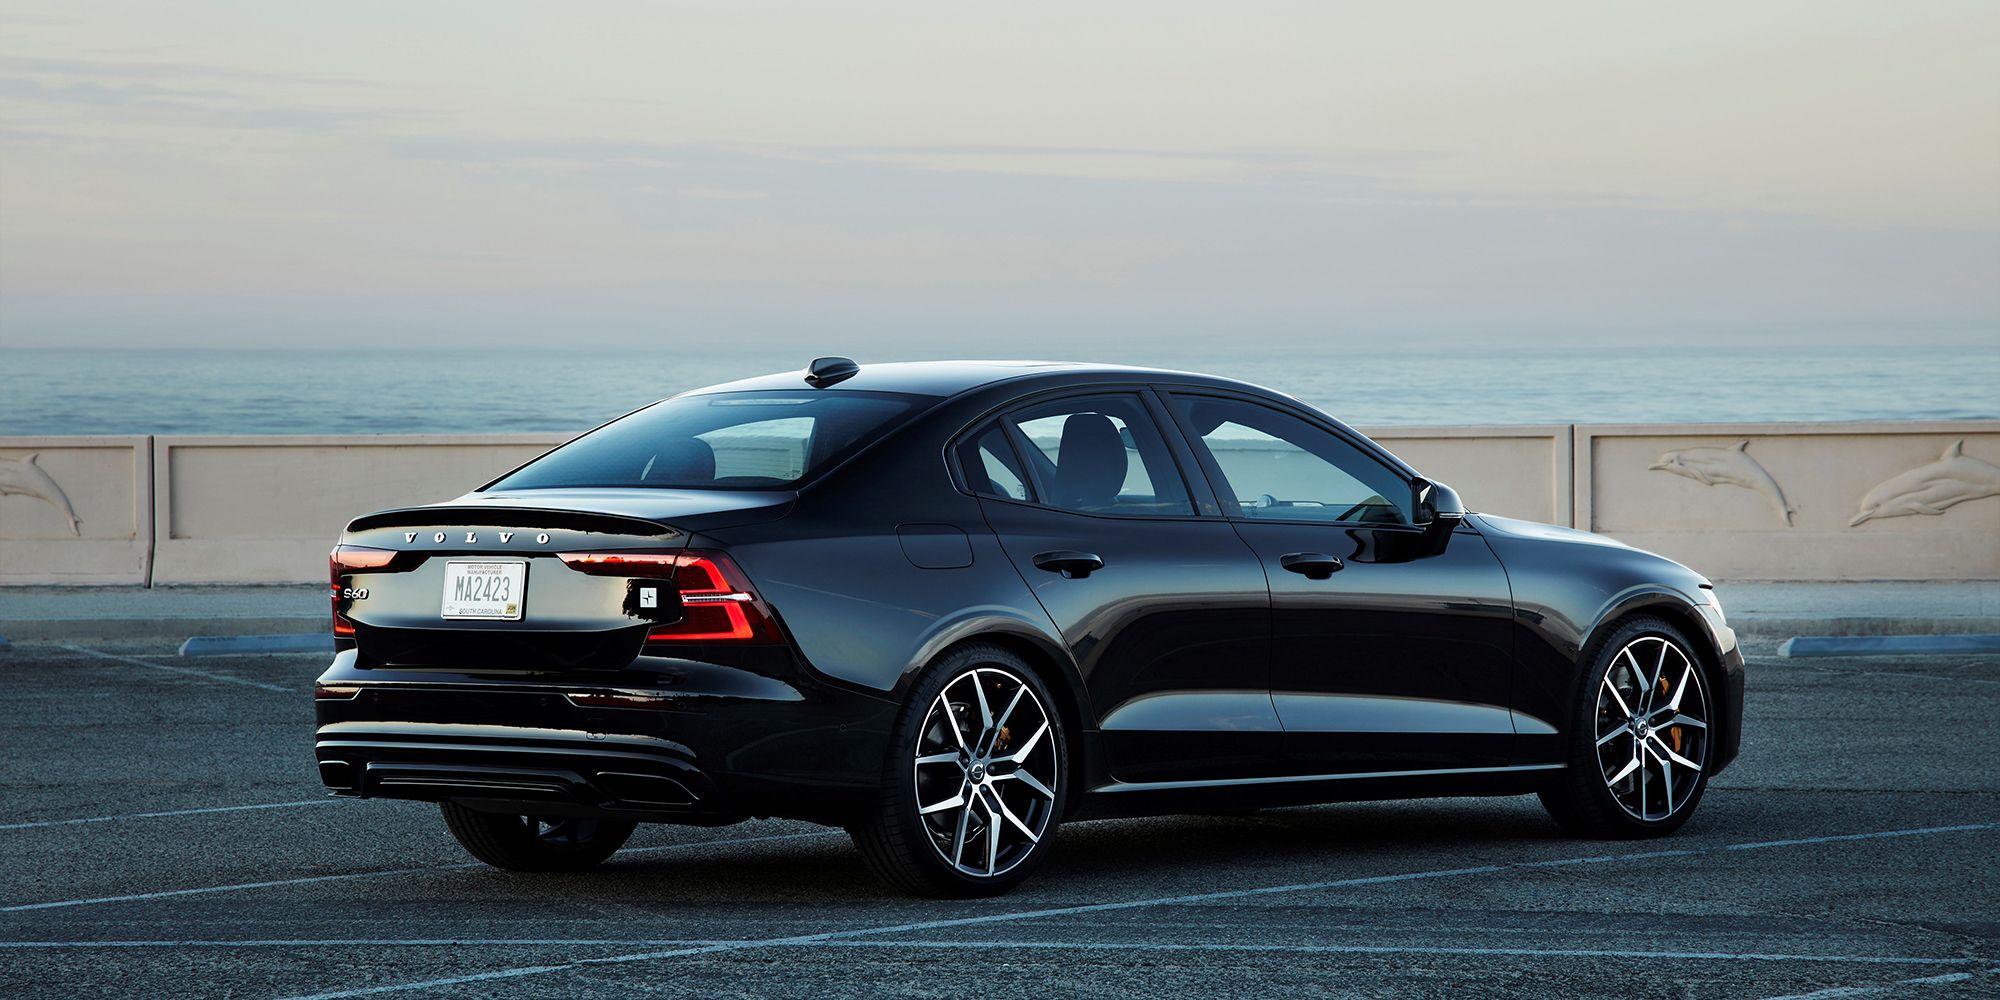 Rear 3/4 view of the S60 Polestar Engineered